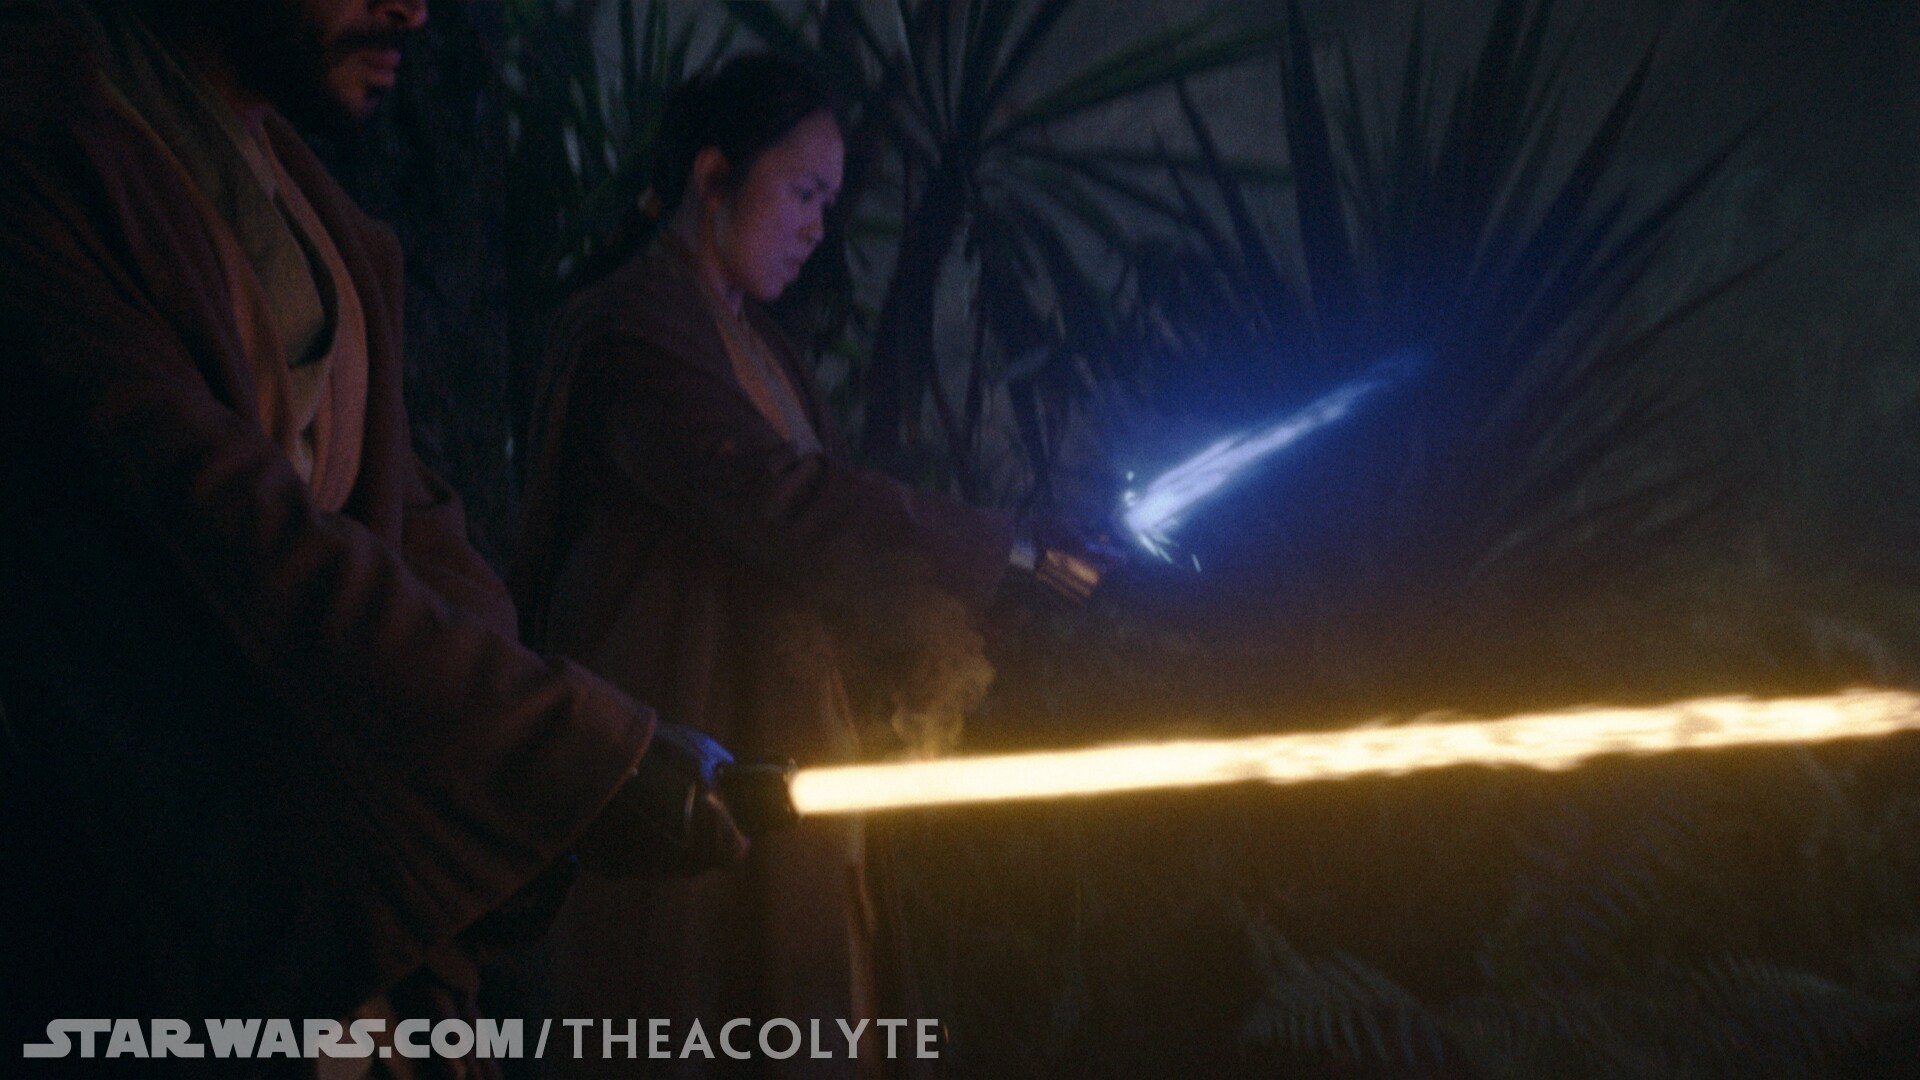 In-universe, cortosis can temporarily short out a lightsaber to disable an attacker, but does not...